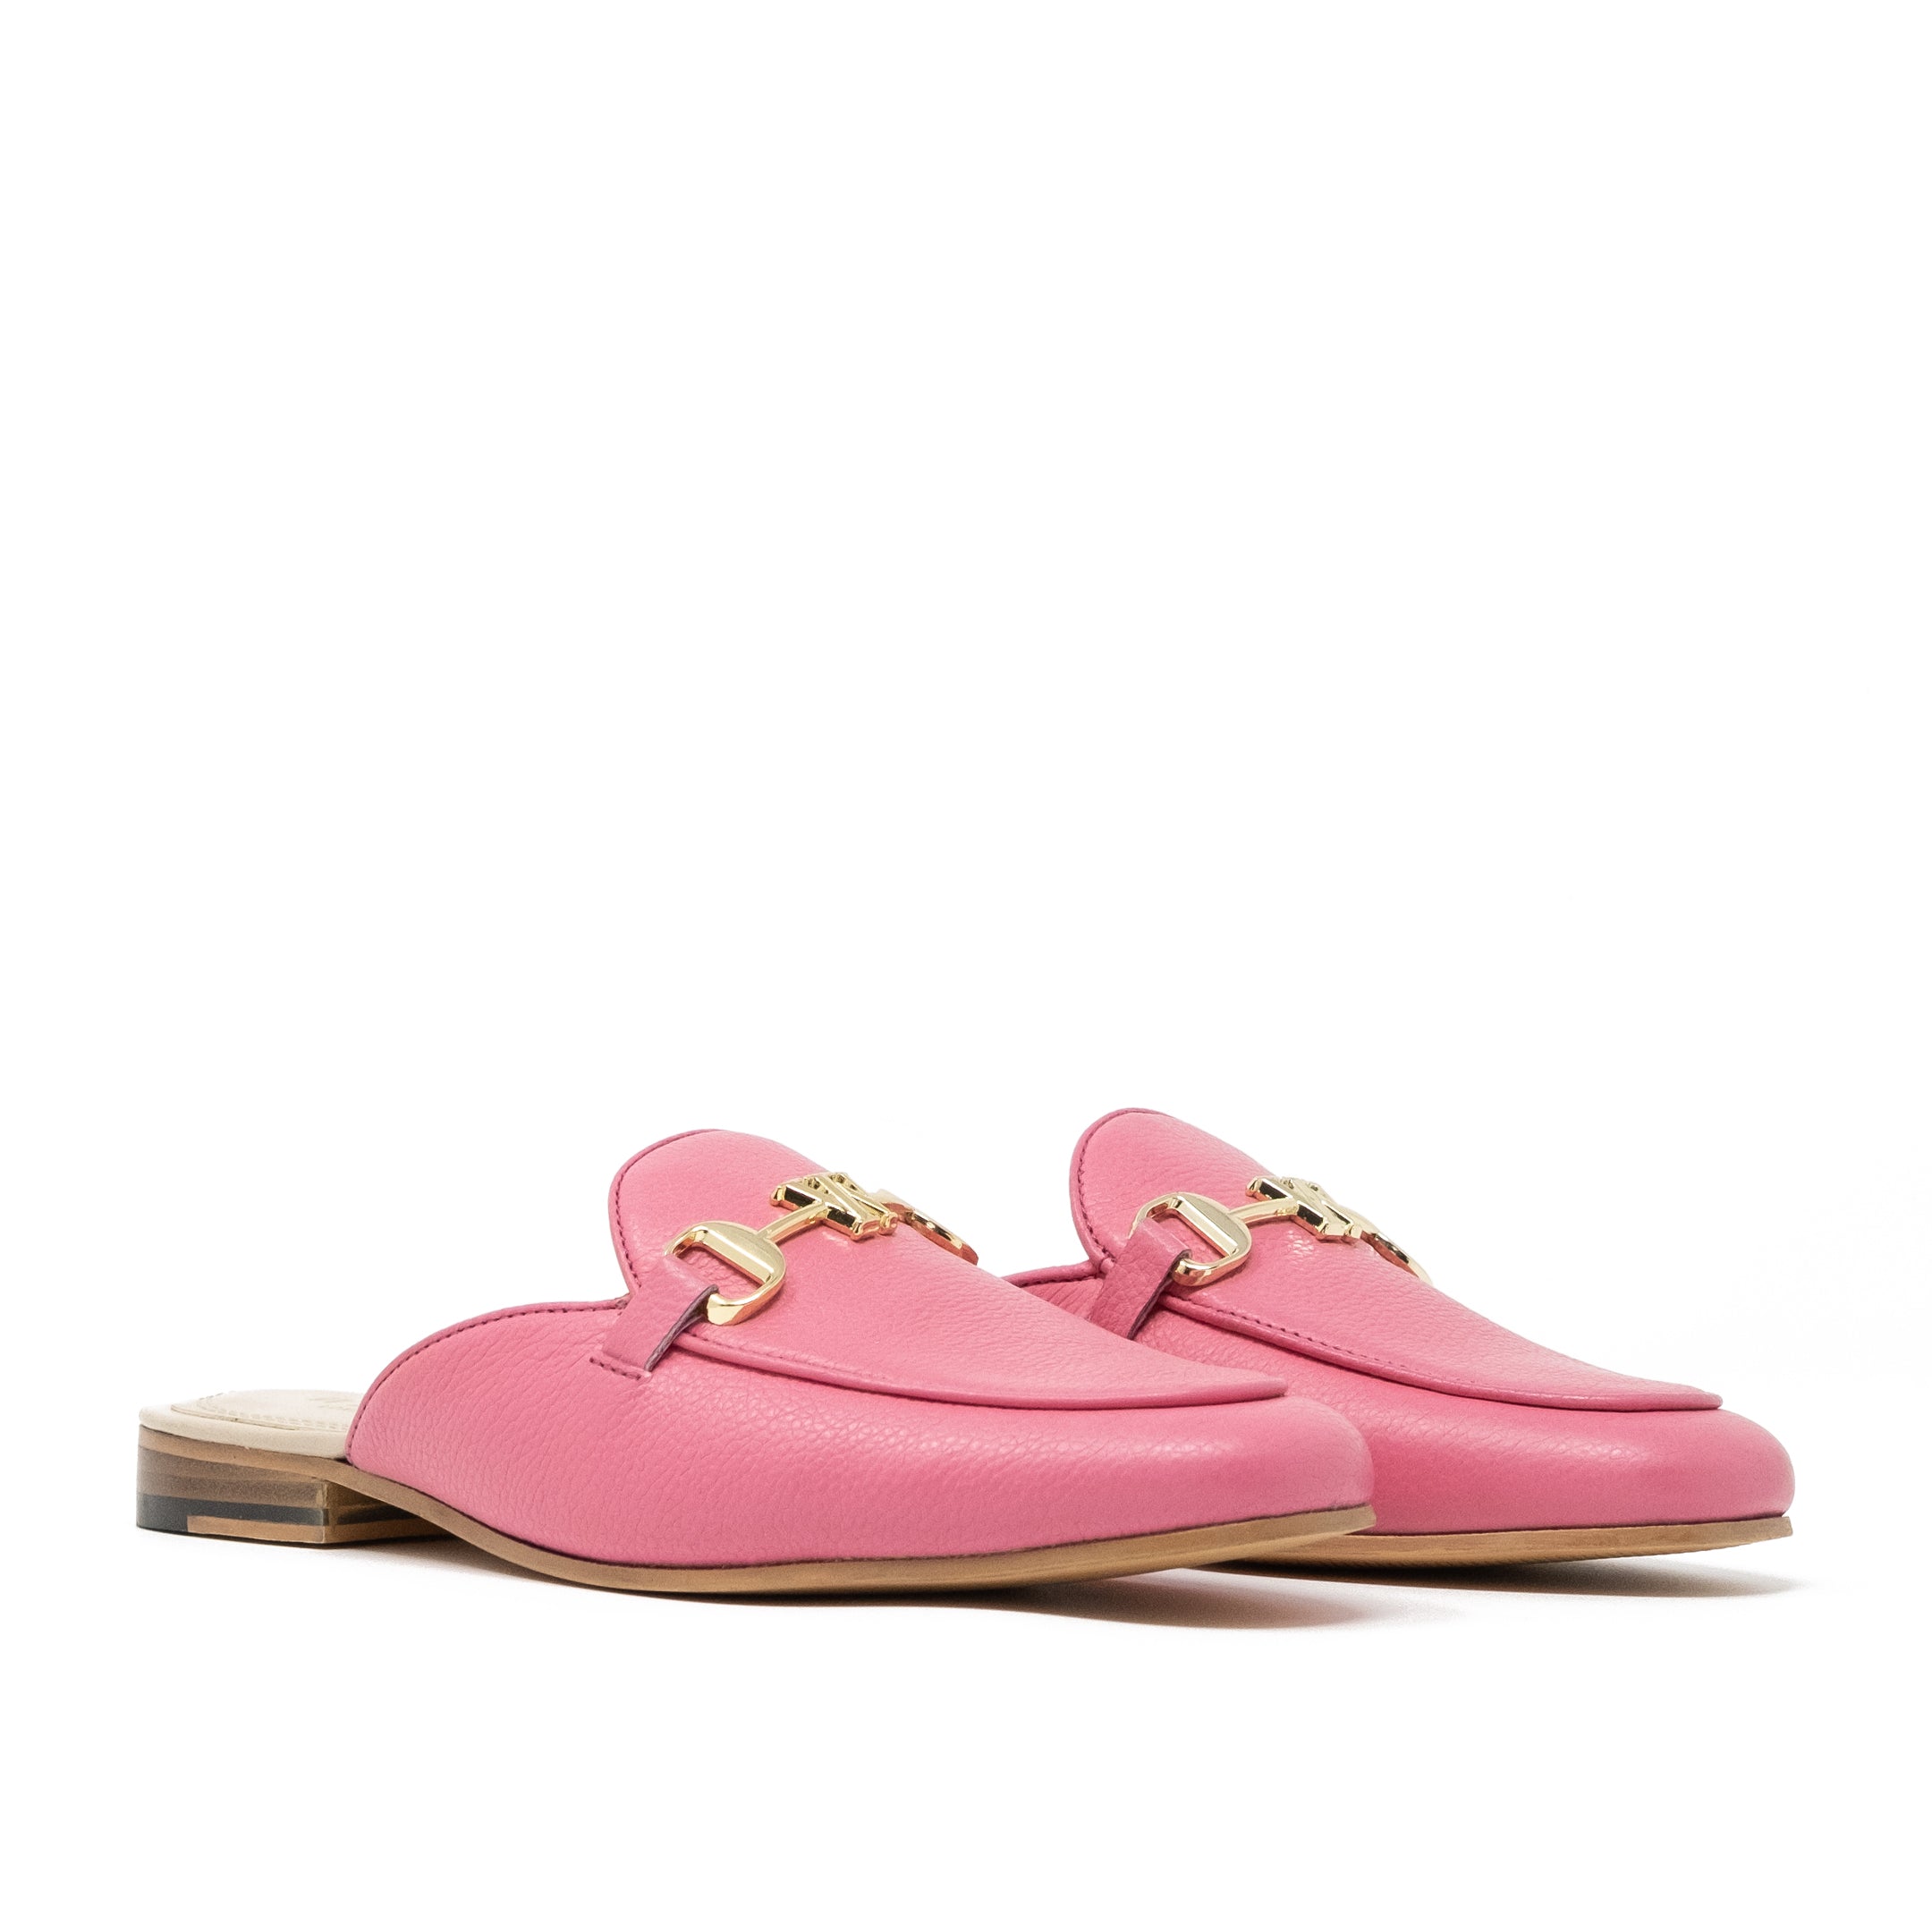 Womens Mule Loafer in Pink Leather